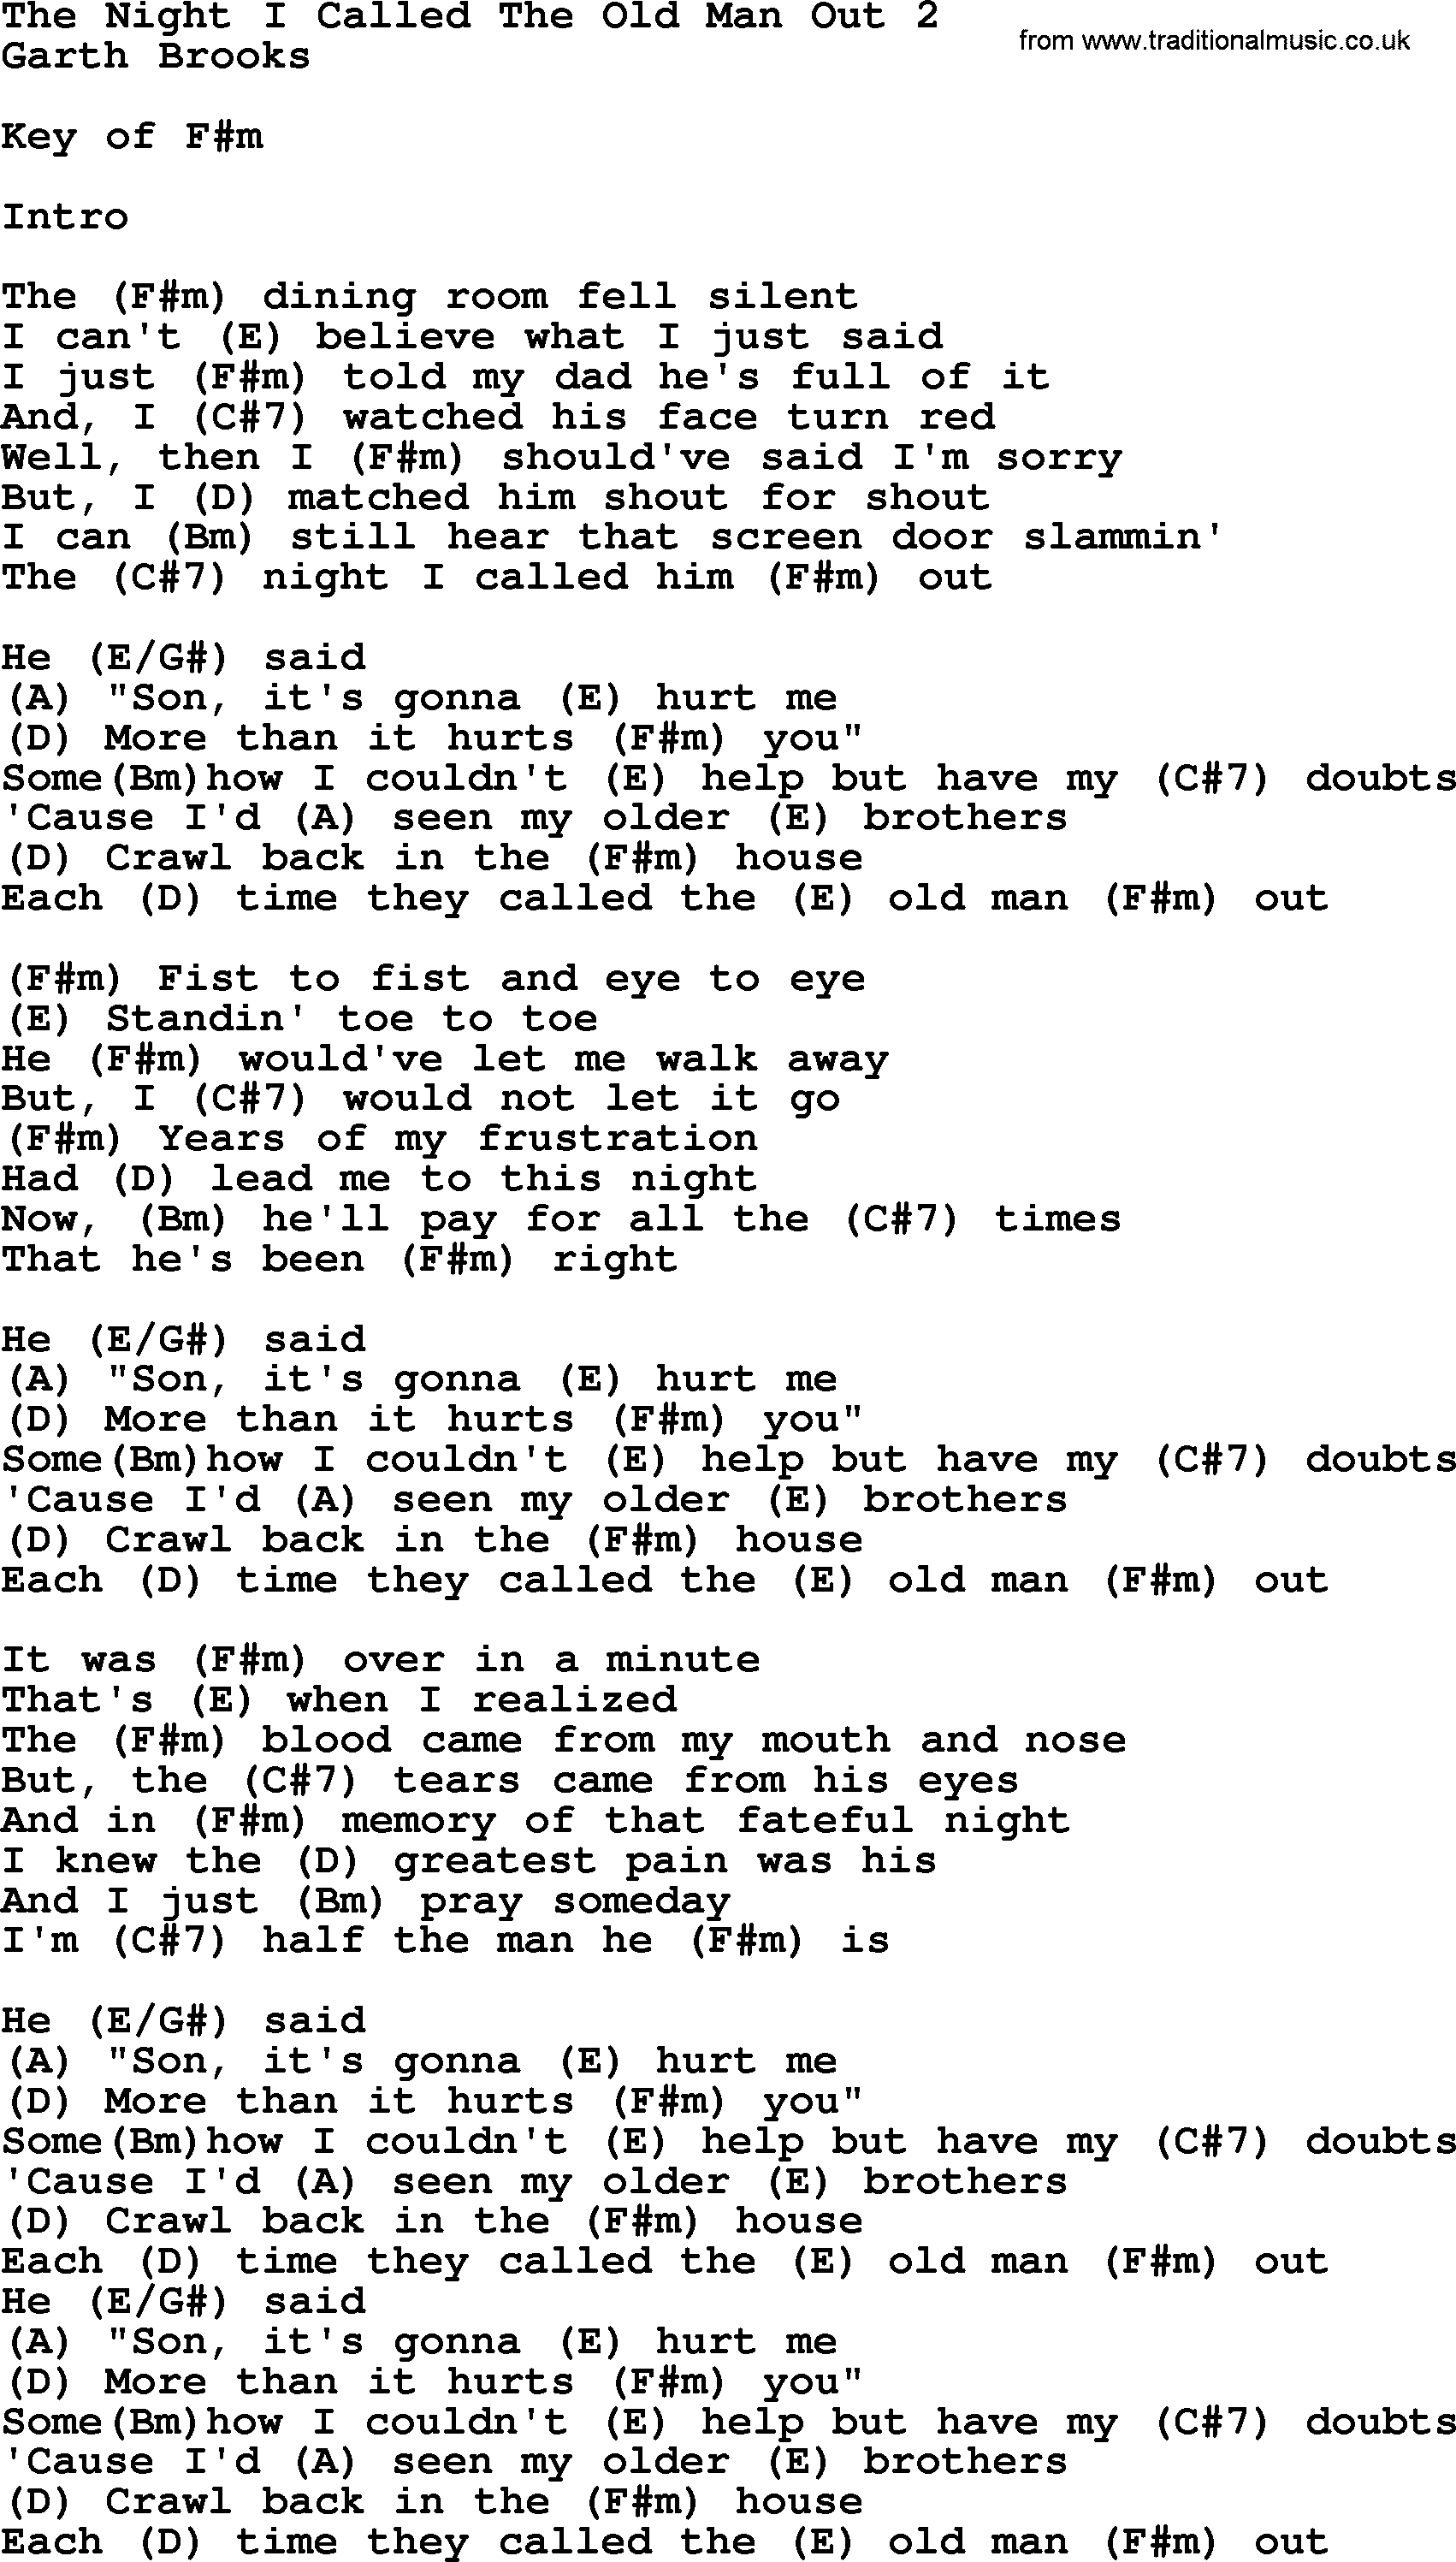 Garth Brooks song: The Night I Called The Old Man Out 2, lyrics and chords